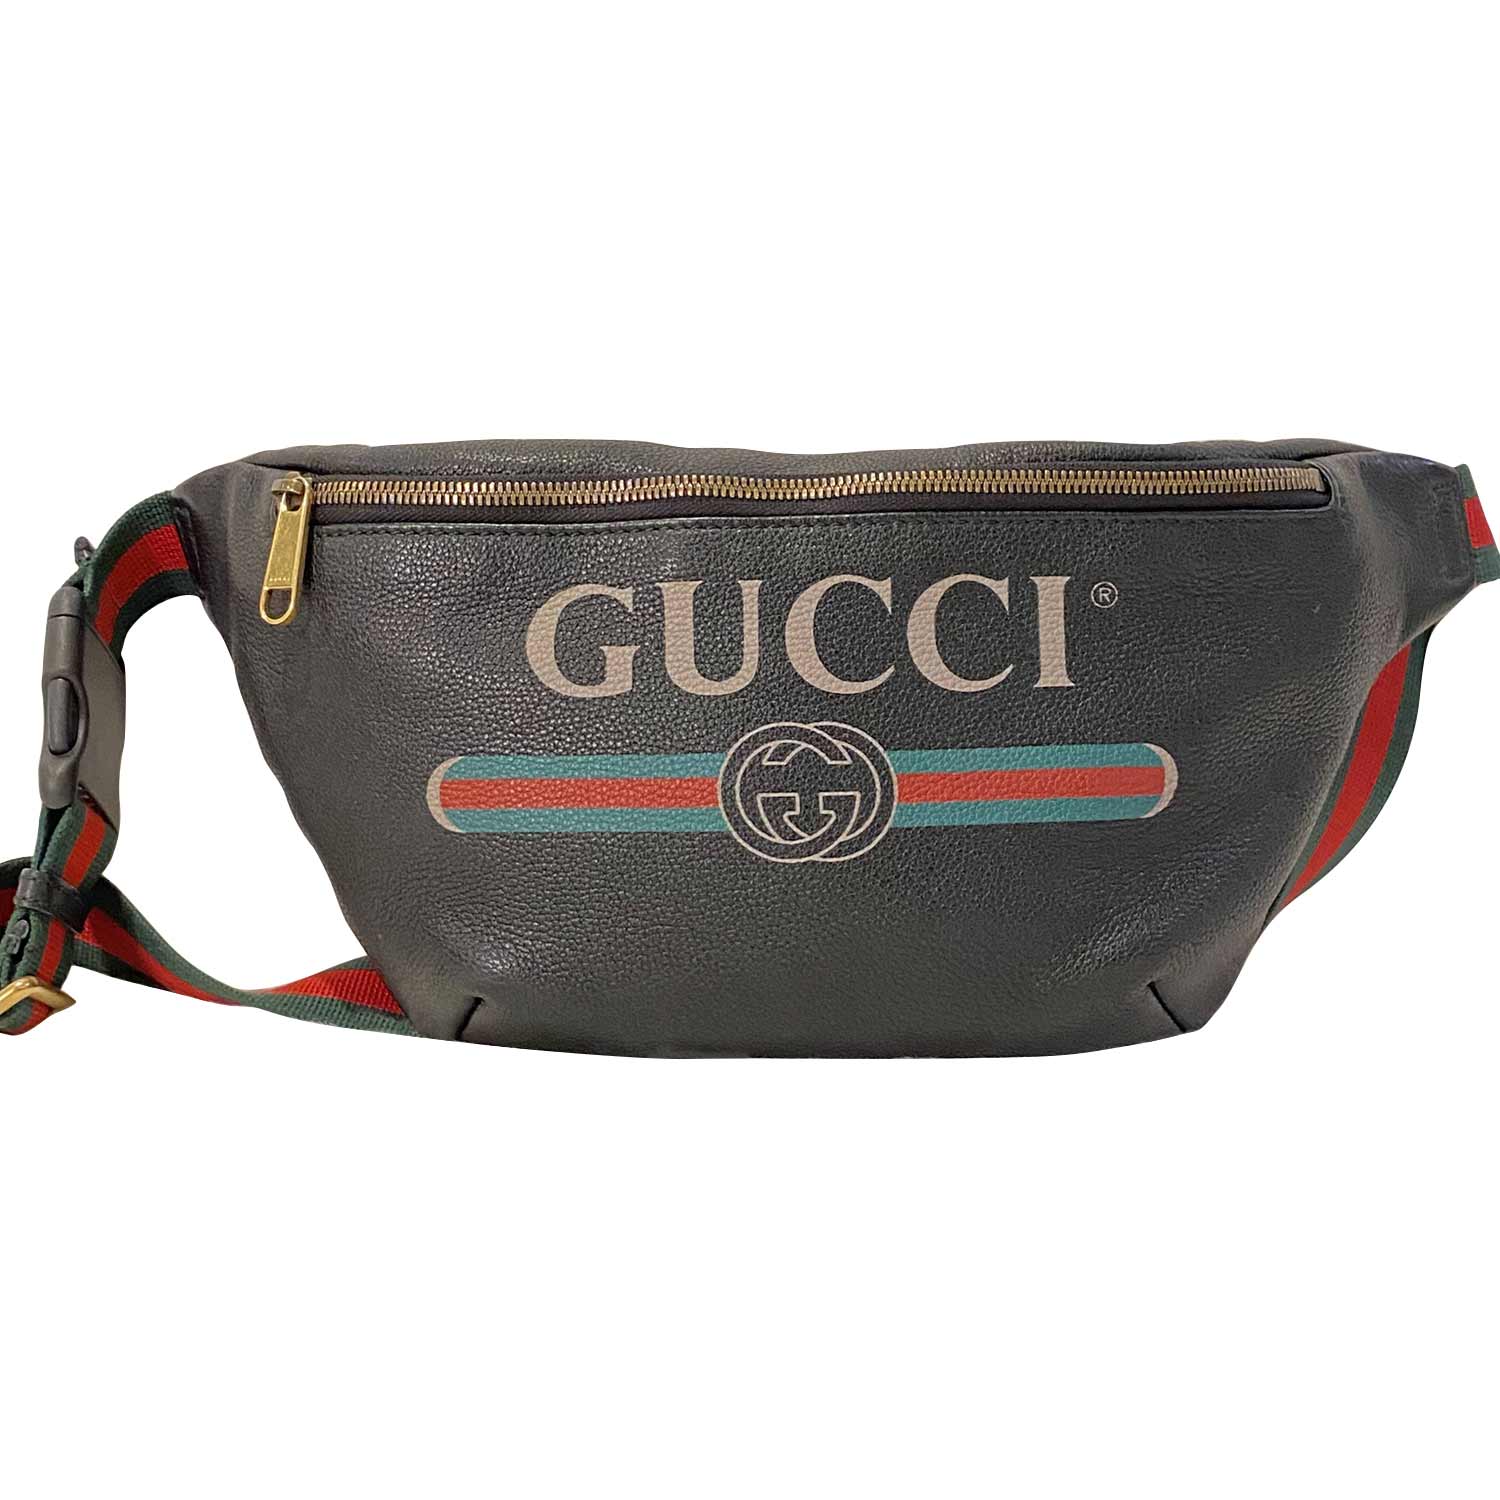 Shop authentic Gucci Logo Print Leather Belt Bag at revogue for just ...